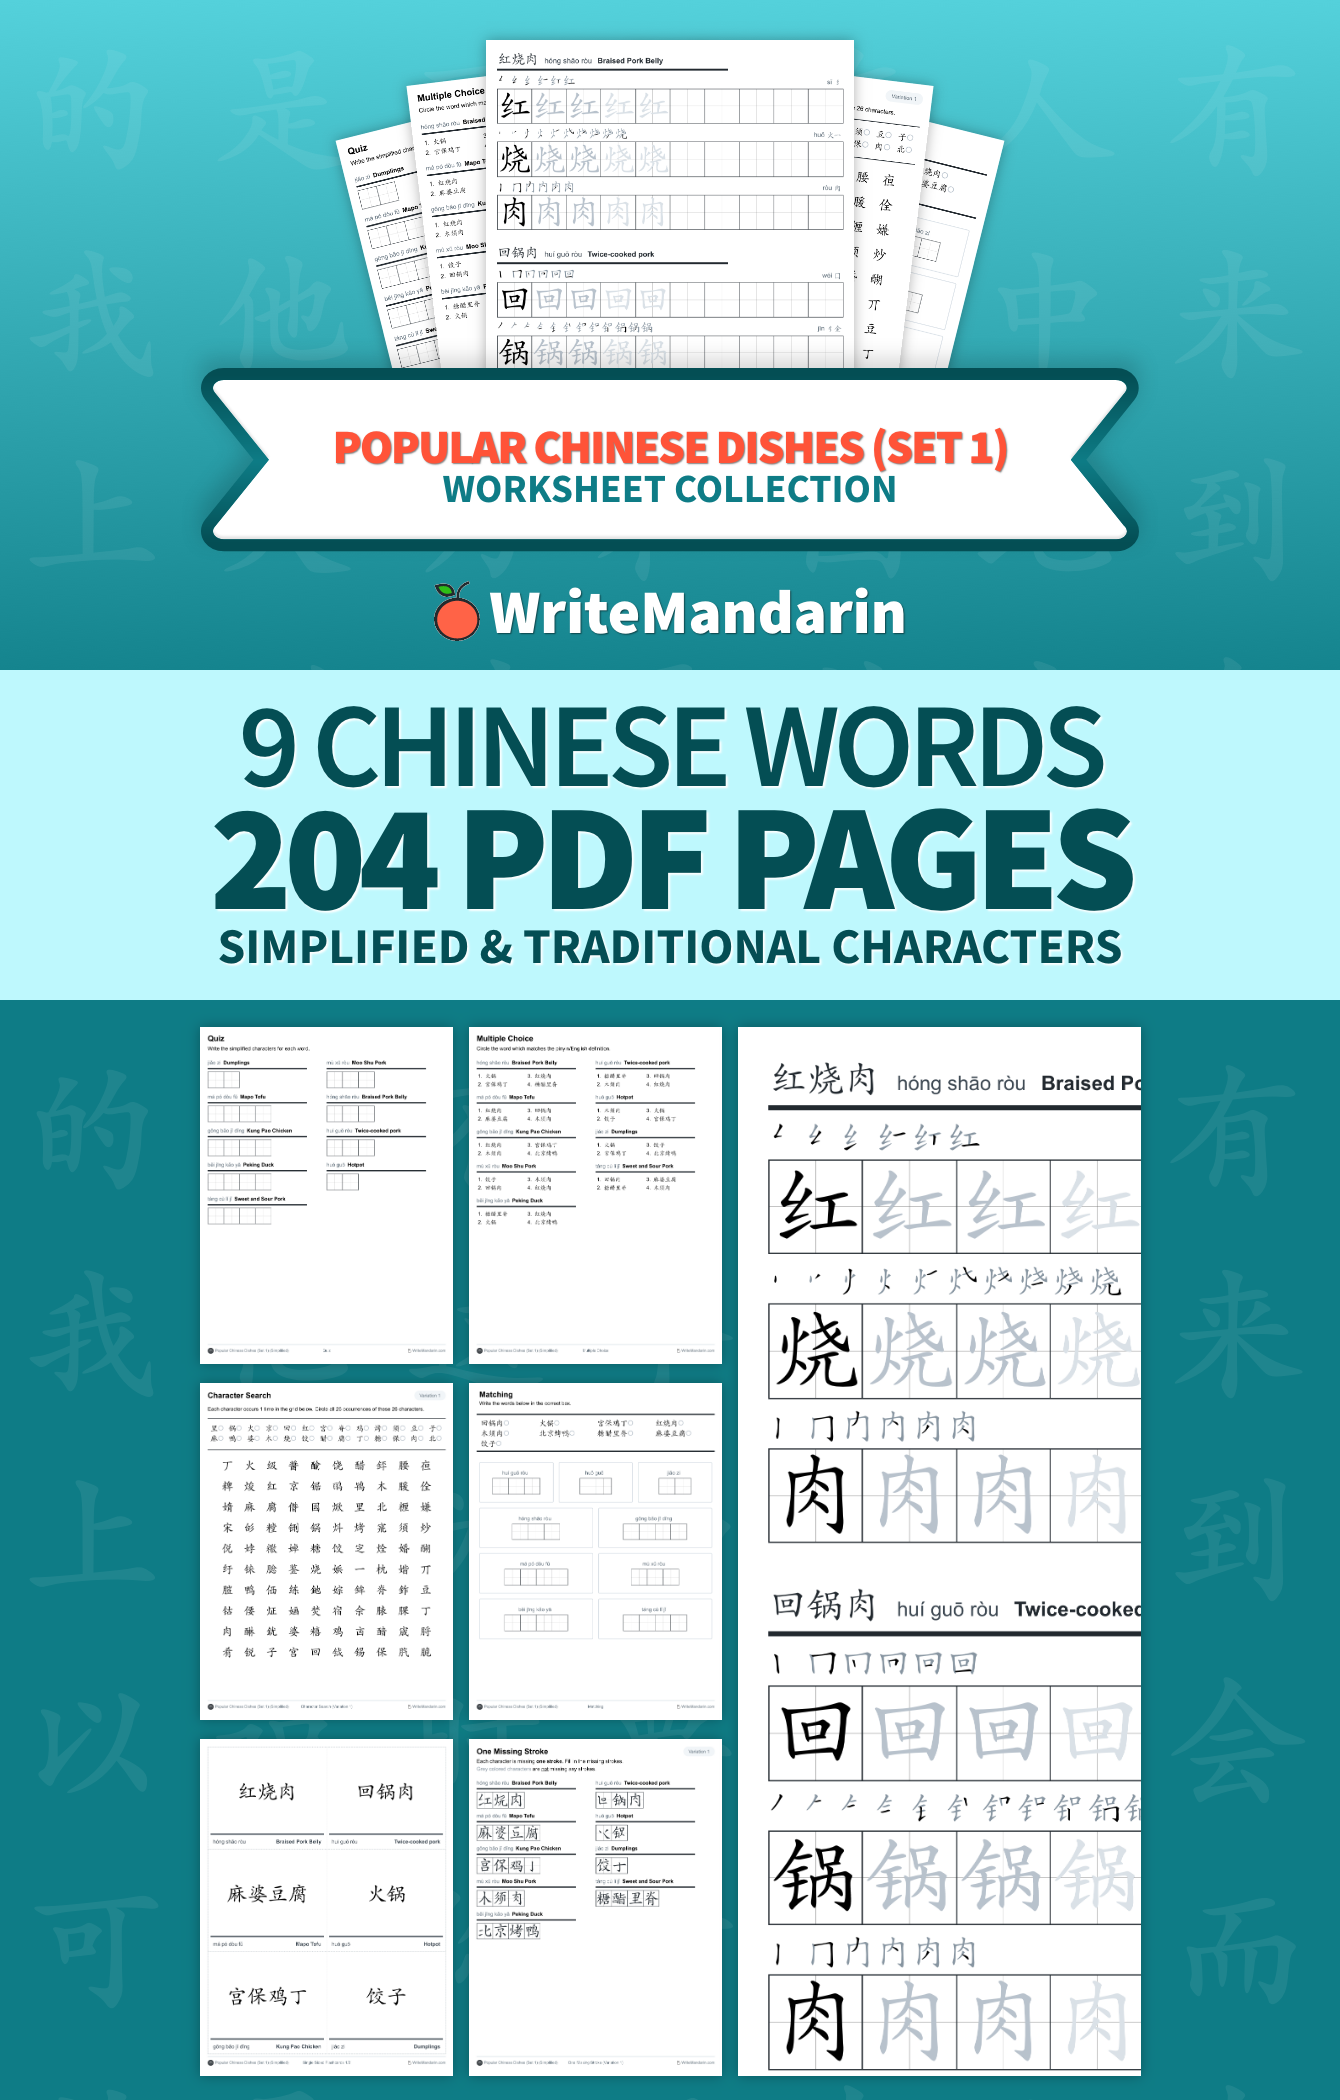 Preview image of Popular Chinese Dishes (Set 1) worksheet collection